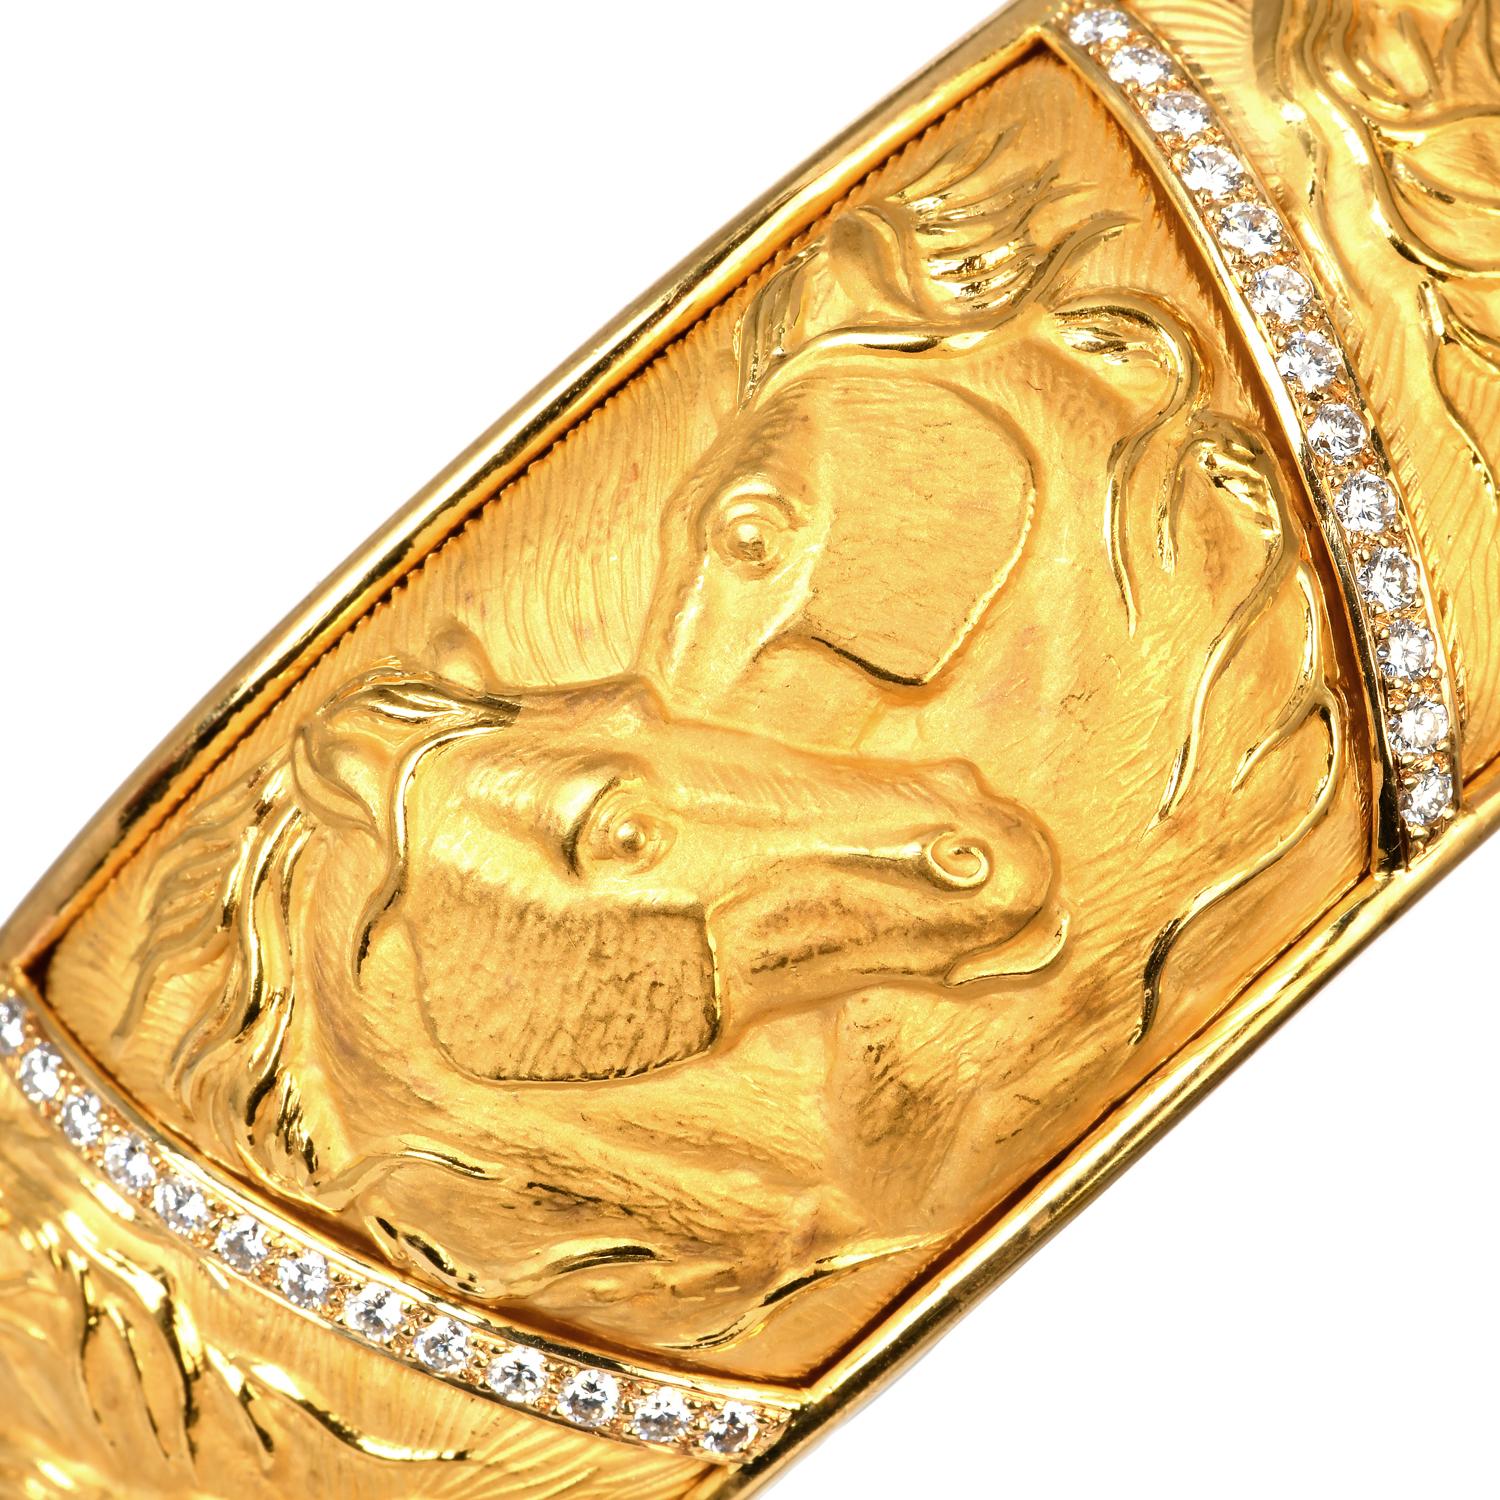 From Late 20th Century Exquisite Carrera Y Carrera Bracelet.

It is finely crafted in 18K Yellow Gold in Spain with a matte satin finish.

From the 